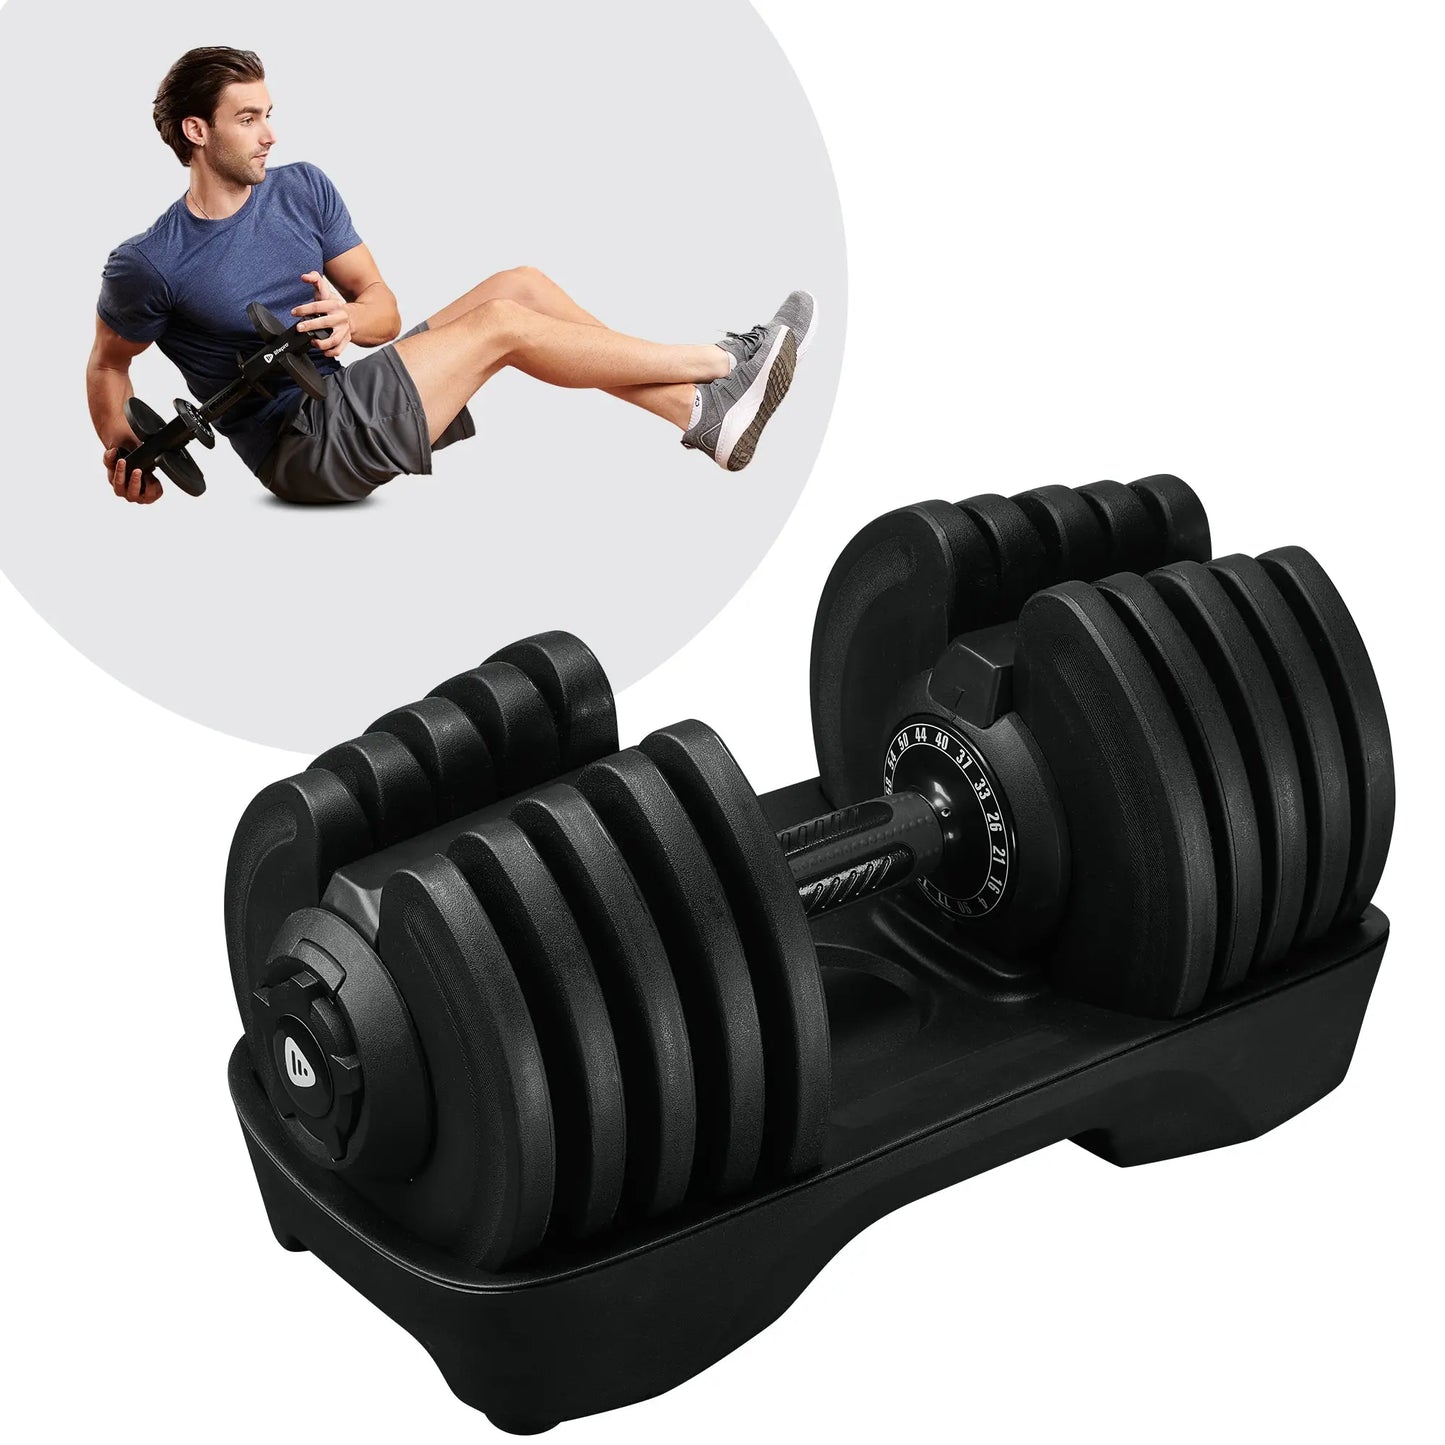 TriForm Max Dumbbell